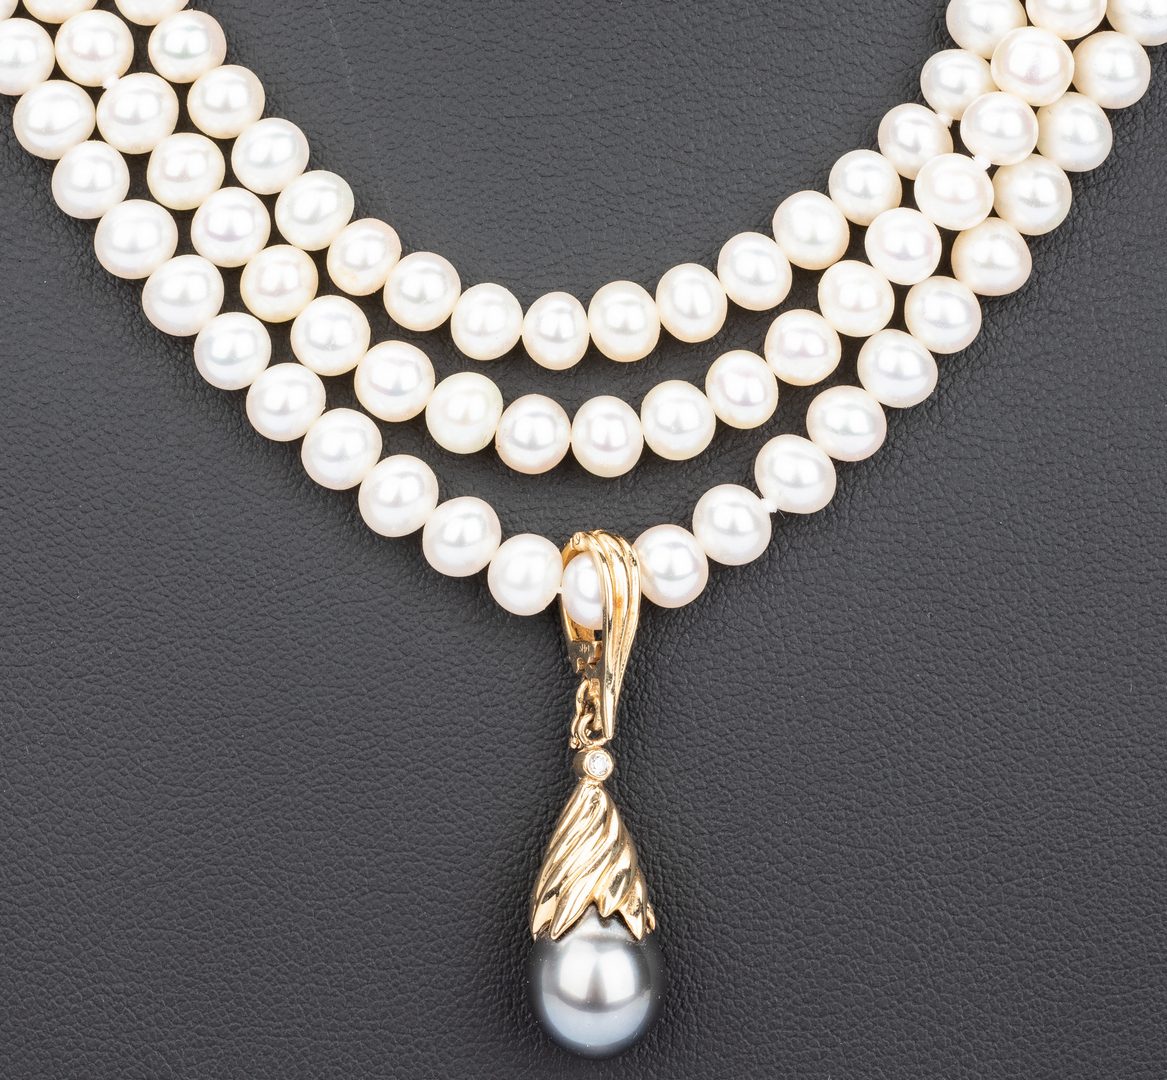 Lot 55: Three Strand Pearl Necklace and Enhancer